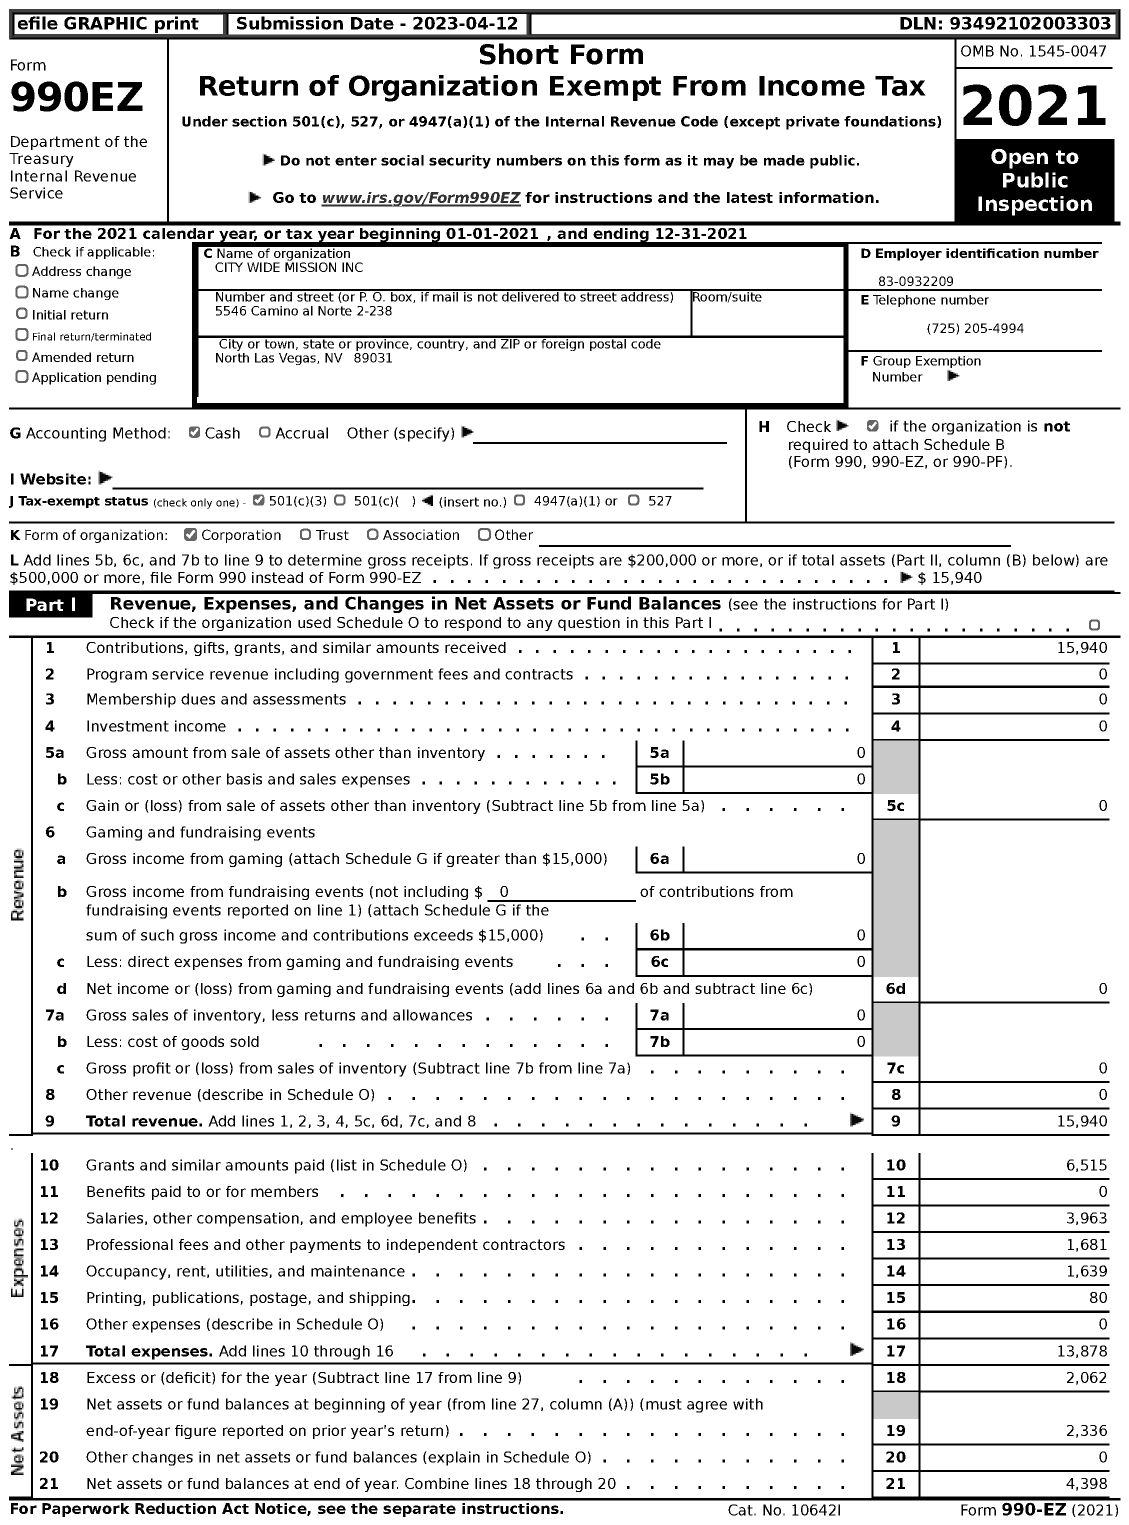 Image of first page of 2021 Form 990EZ for City Wide Mission